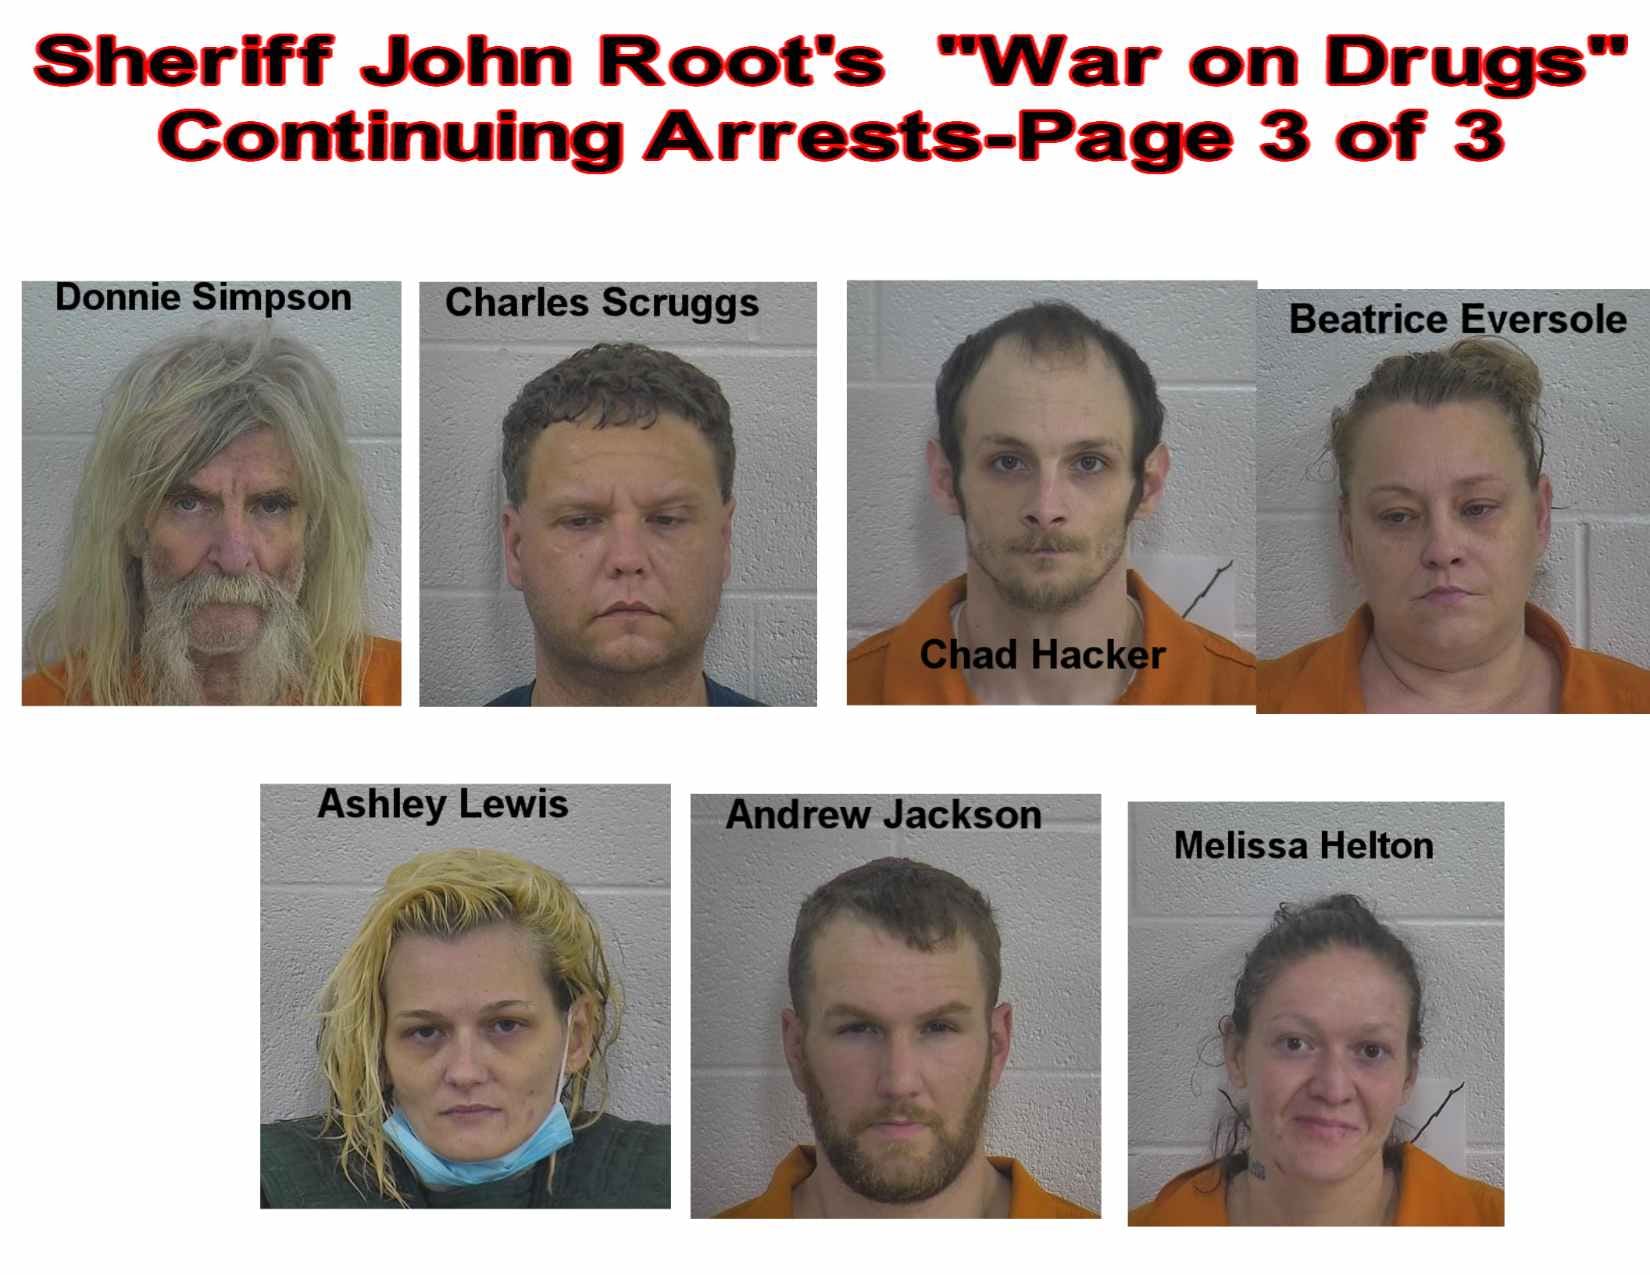 More than two dozen people rounded up in big Kentucky drug bust operation